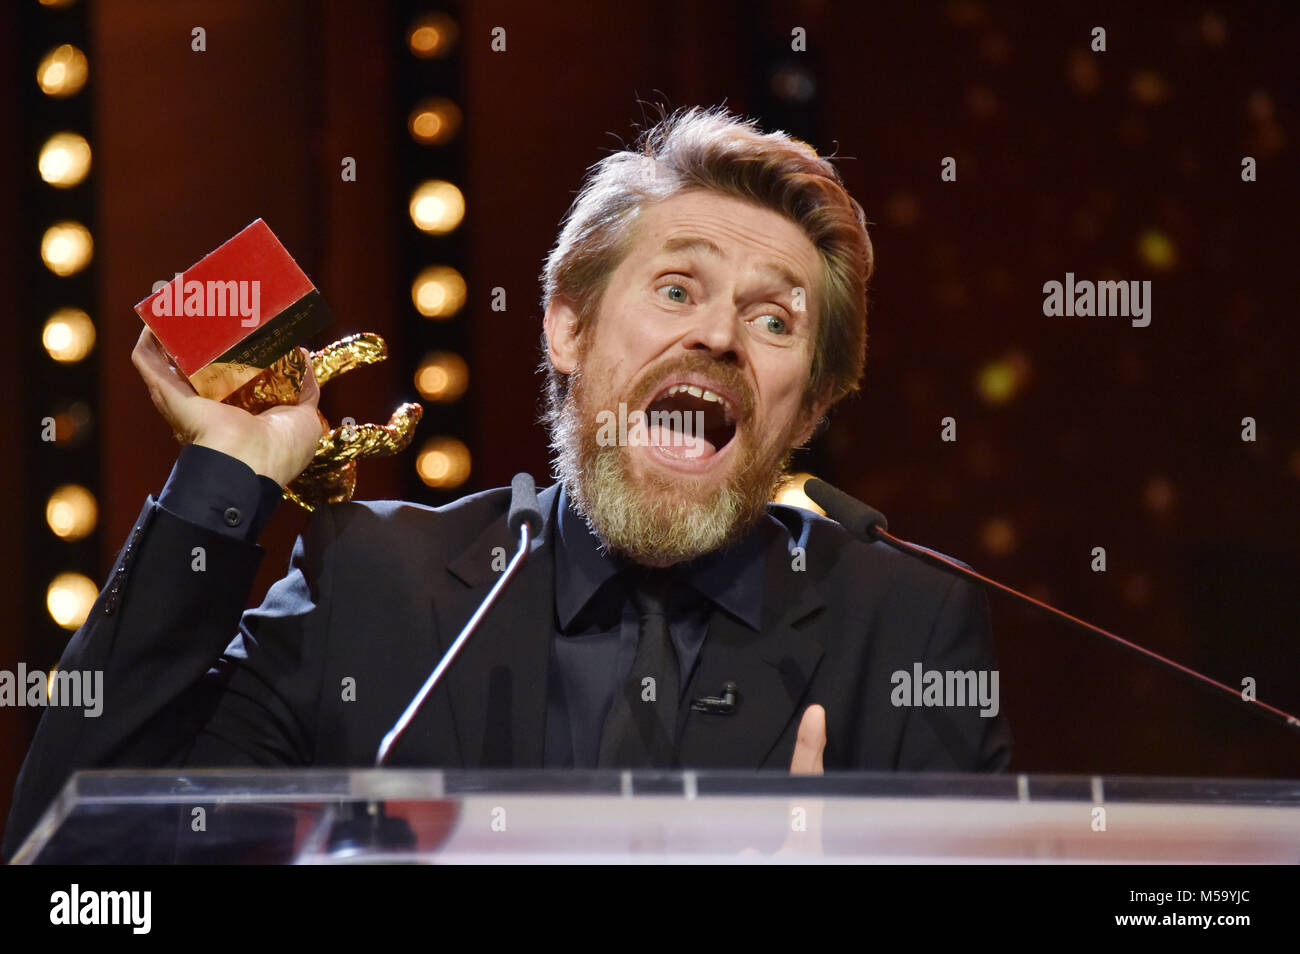 Willem Dafoe attends the Honorary Golden Bear Award Ceremony for Willem Dafoe at the 68th Berlin International Film Festival / Berlinale 2018 at Berlinale Palast on February 20, 2018 in Berlin, Germany. | Verwendung weltweit/picture alliance Stock Photo